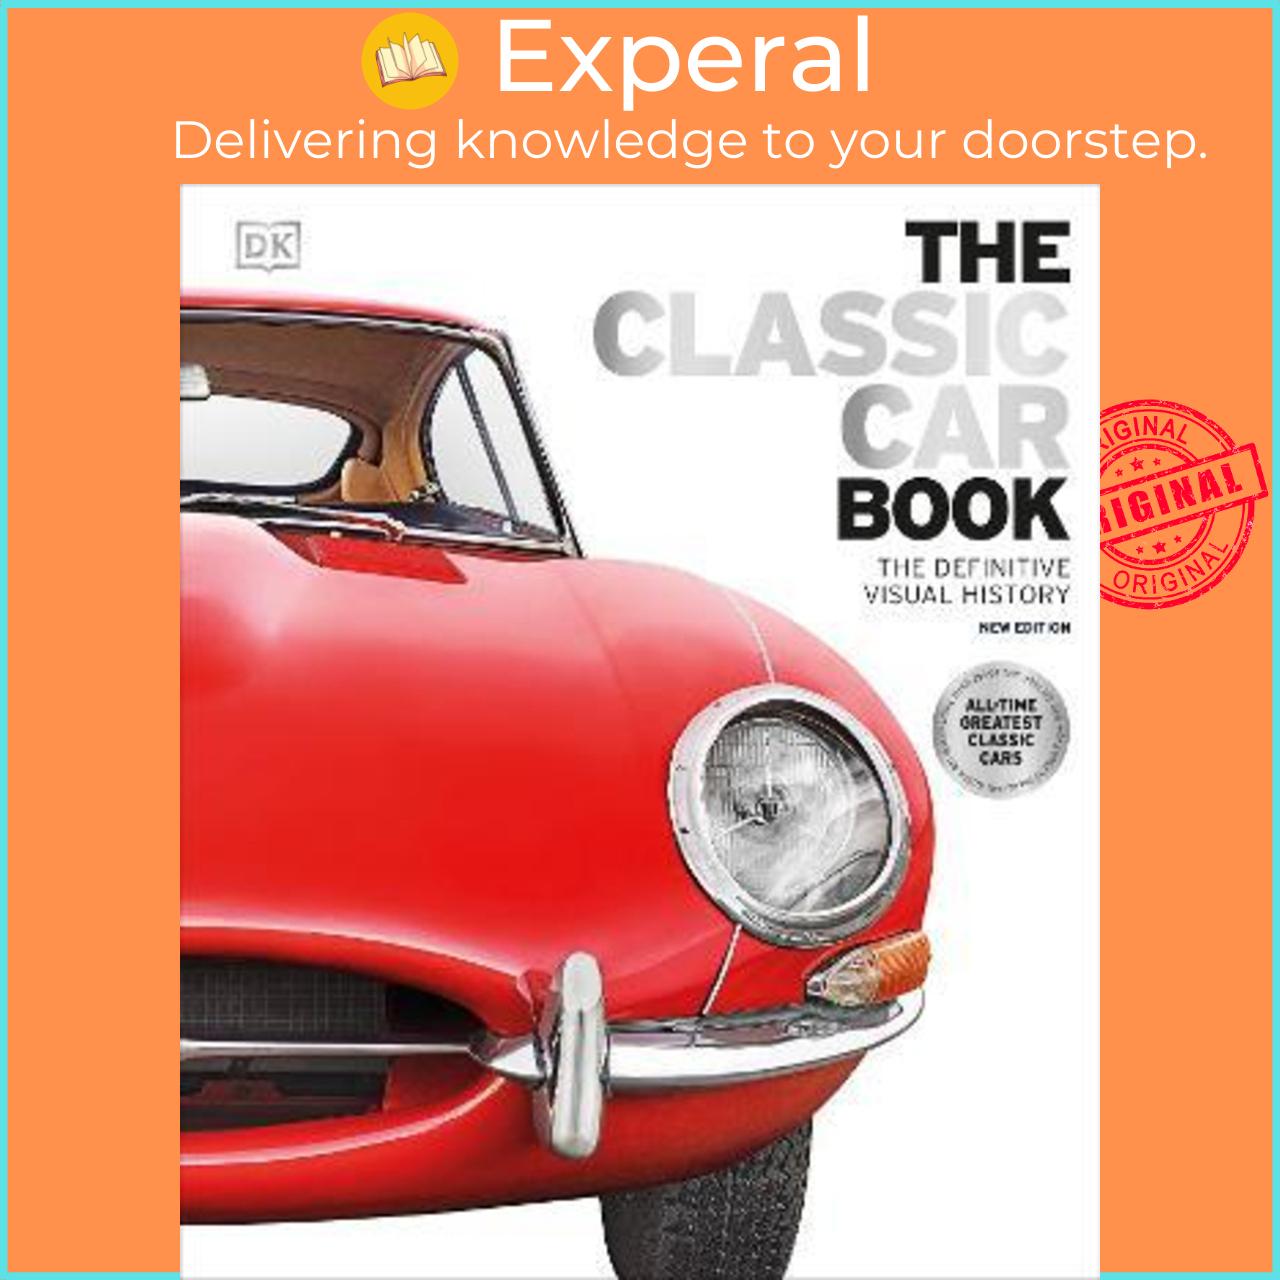 Sách - The Classic Car Book : The Definitive Visual History by Giles Chapman (UK edition, hardcover)